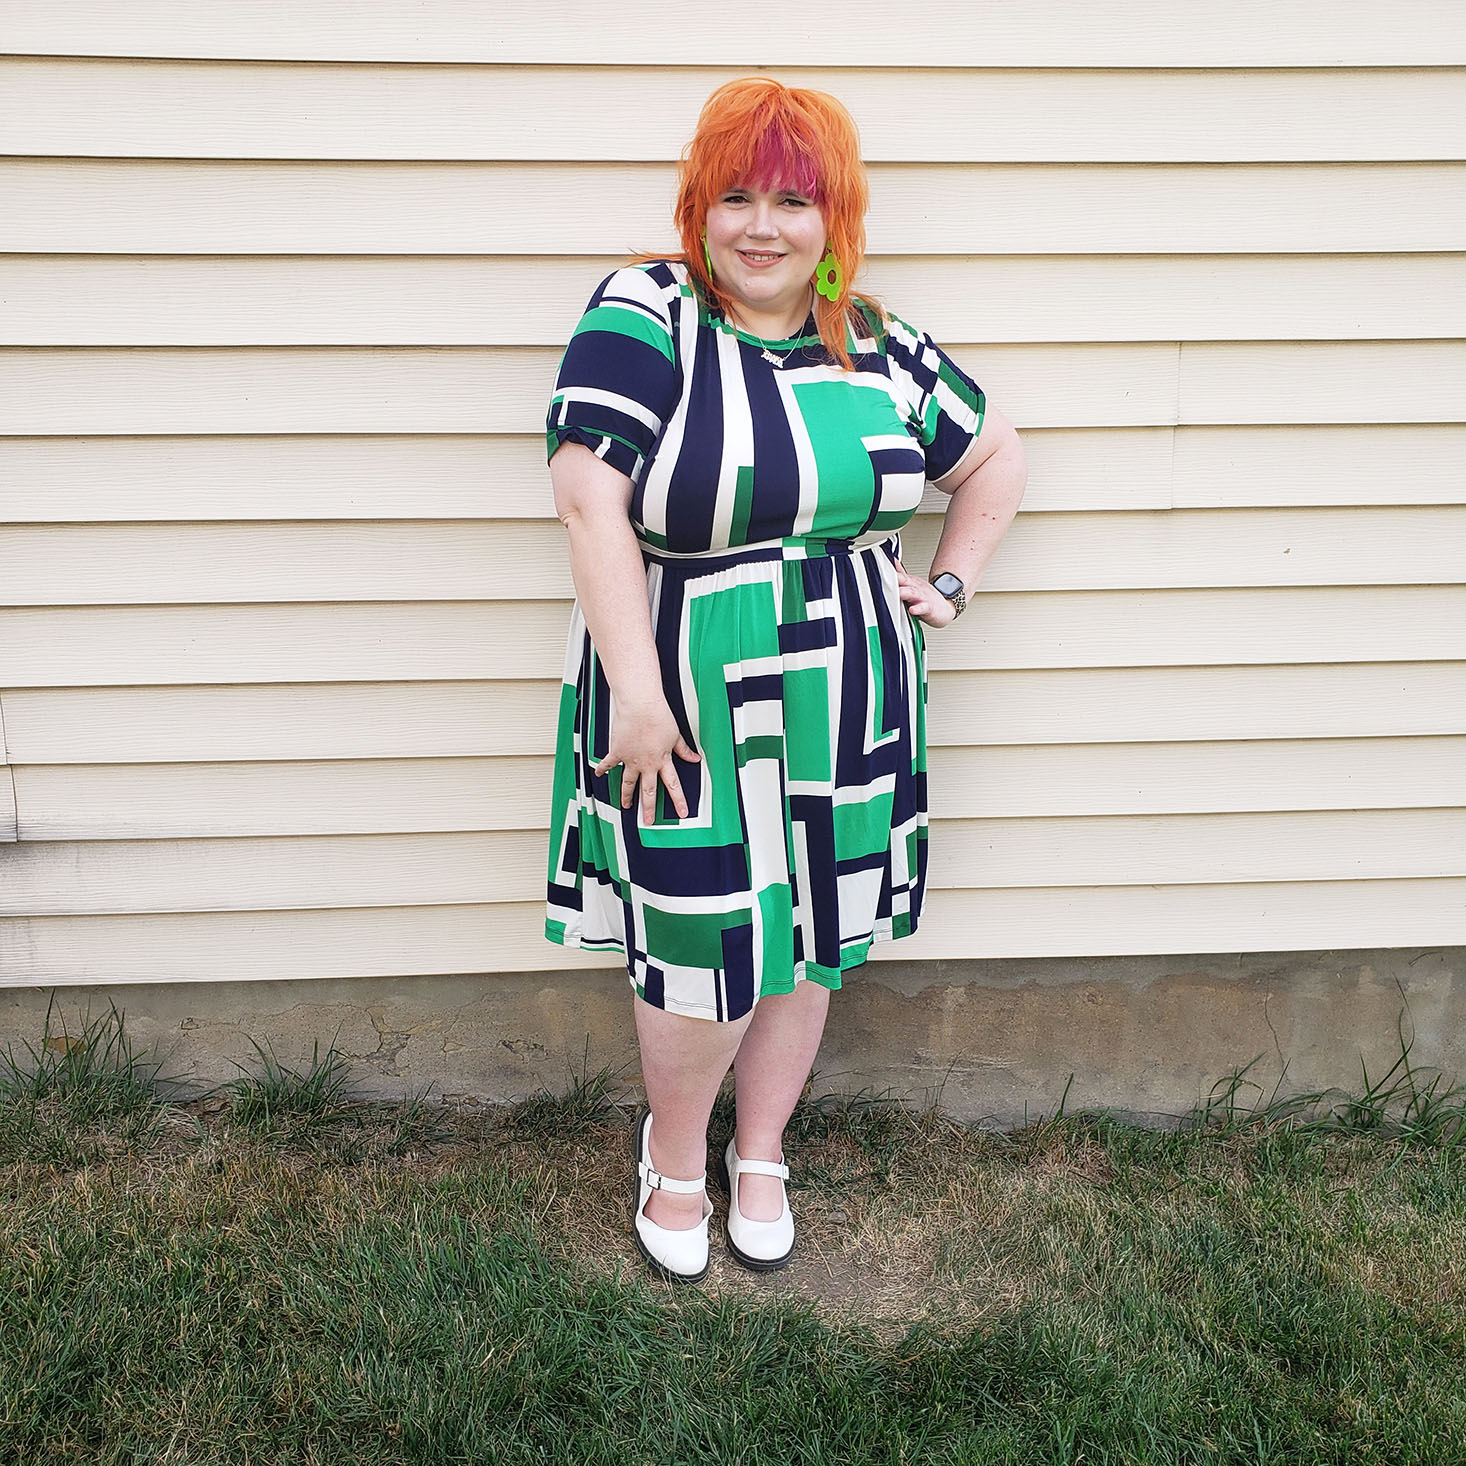 An Honest Review Of Gwynnie Bee's Plus Size Clothing Subscription Service -  The Plus Life